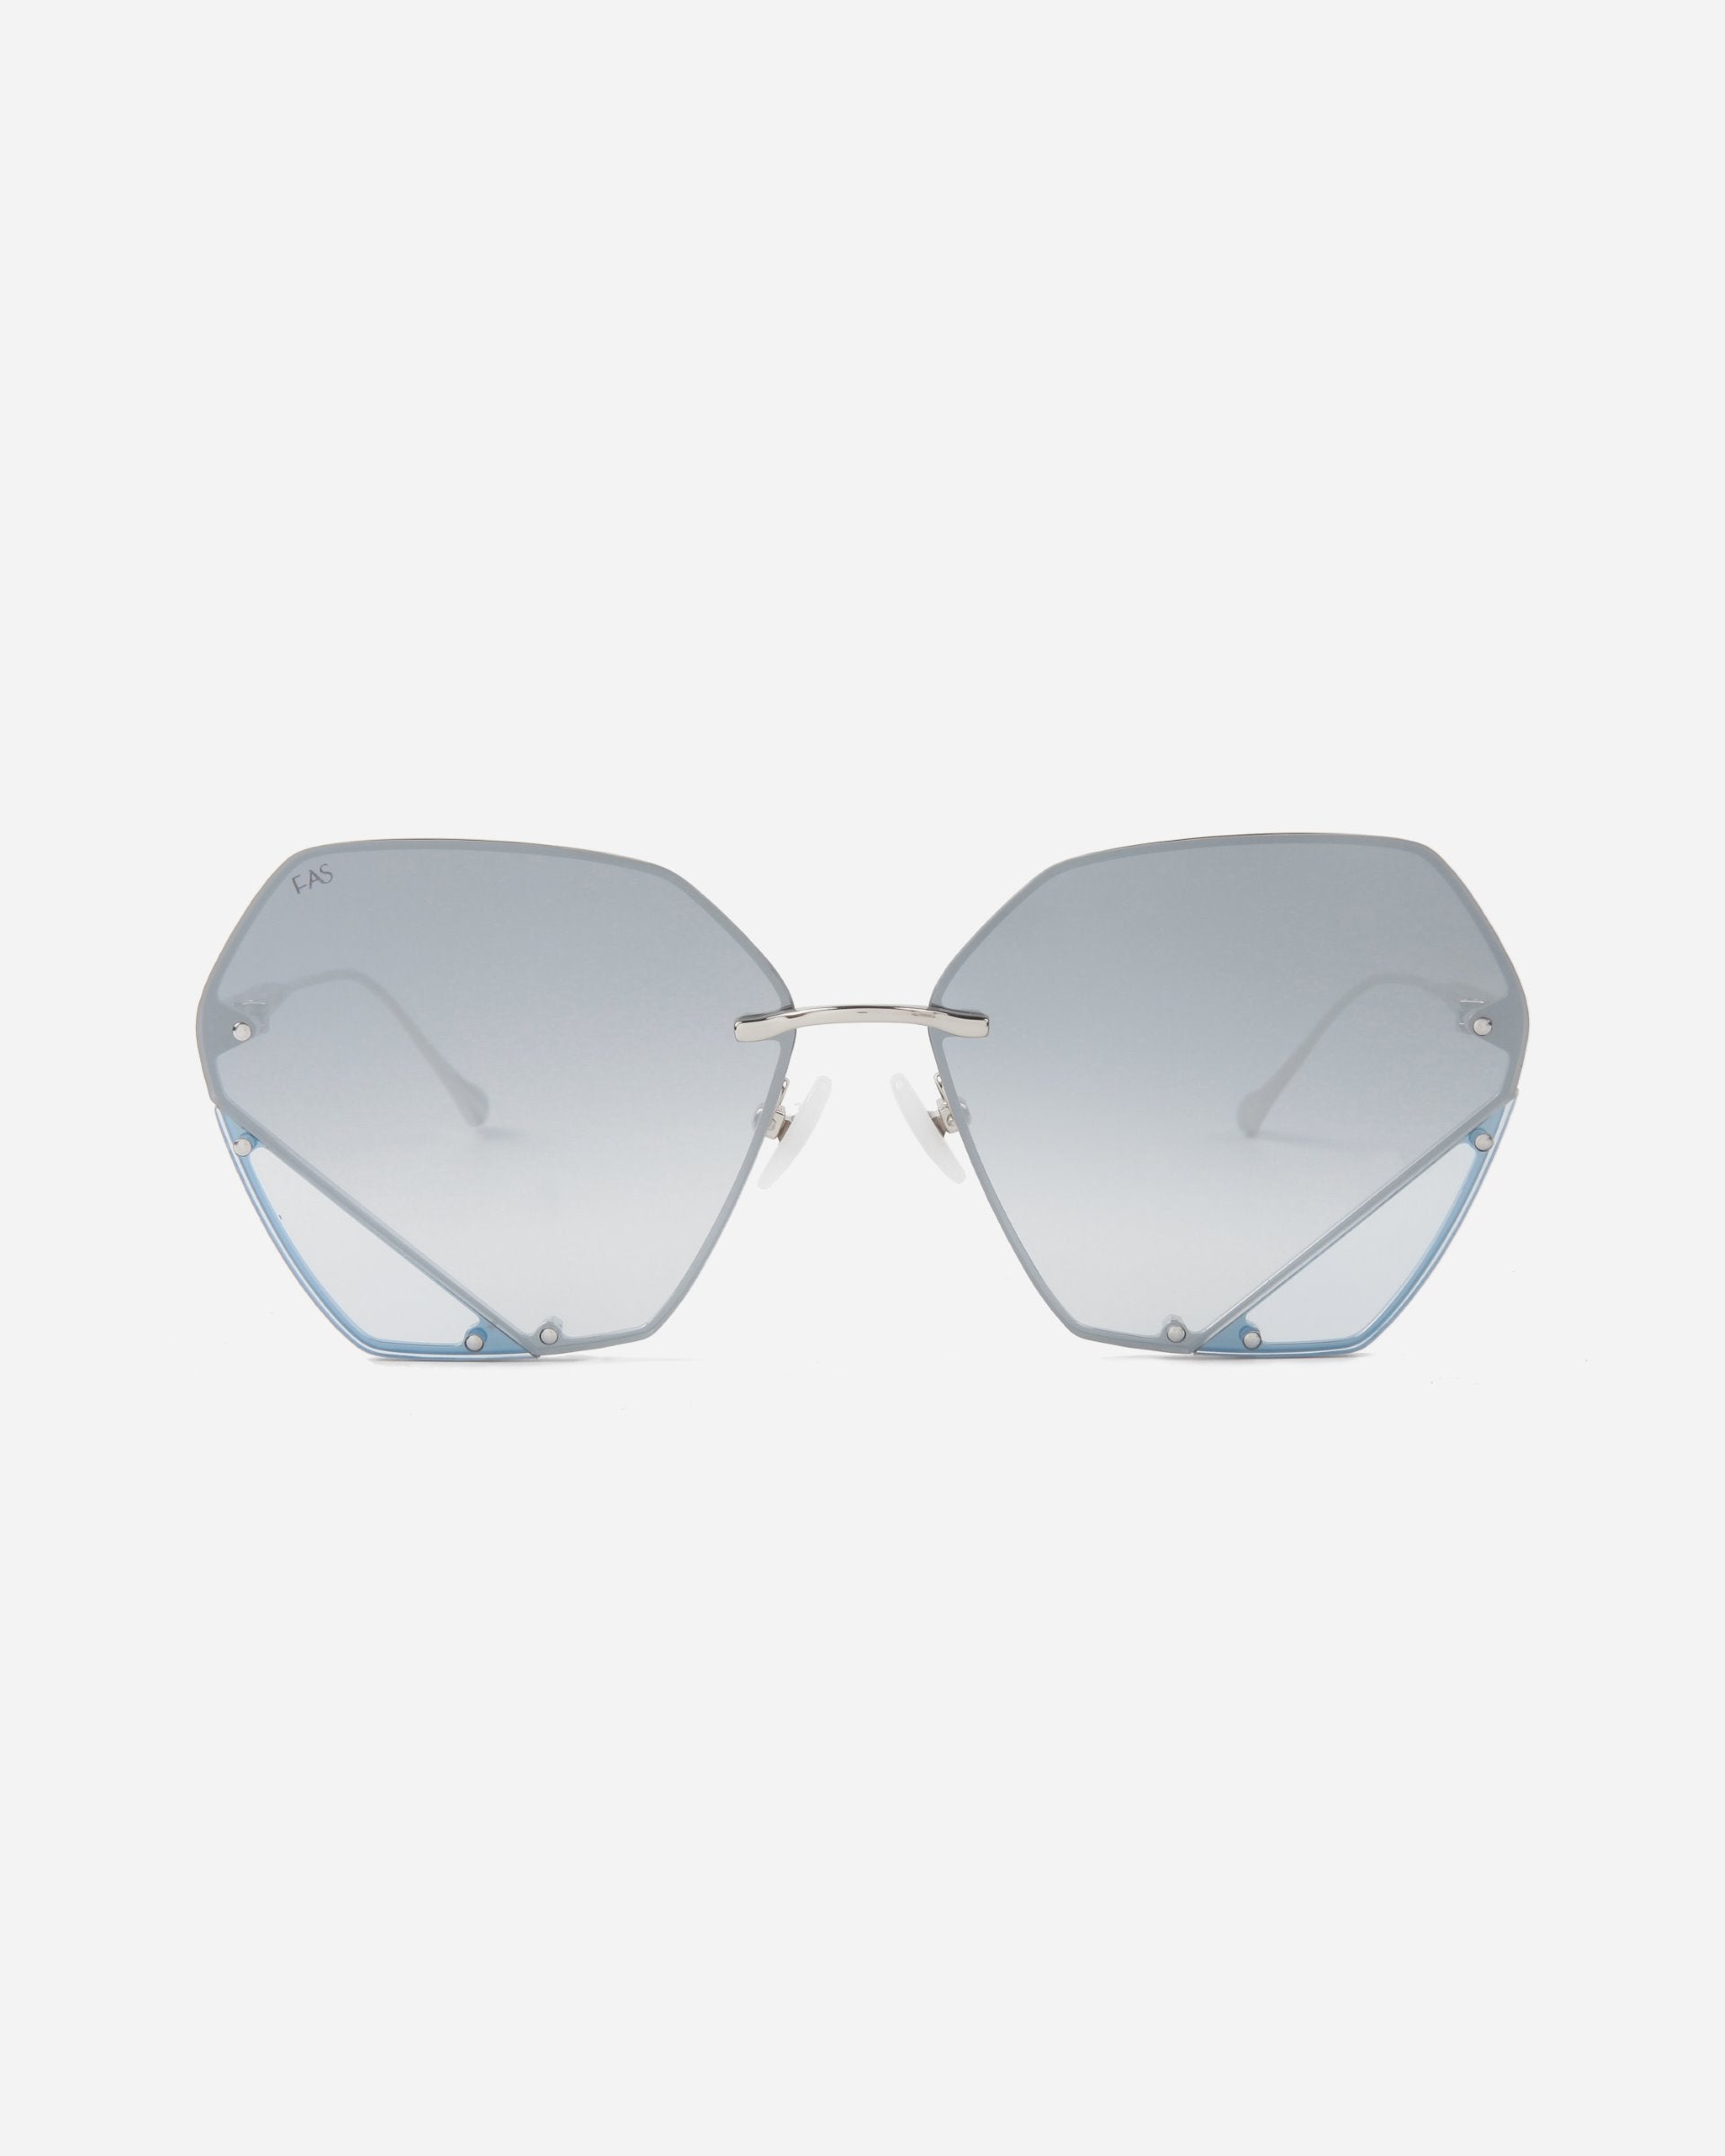 Hexagon-shaped Icy sunglasses with blue tinted lenses and sleek metal frames by For Art&#39;s Sake® on a white background. The design is minimalist with light blue accents at the bottom corners of the geometric lenses, jadestone nosepads, and UV protection.